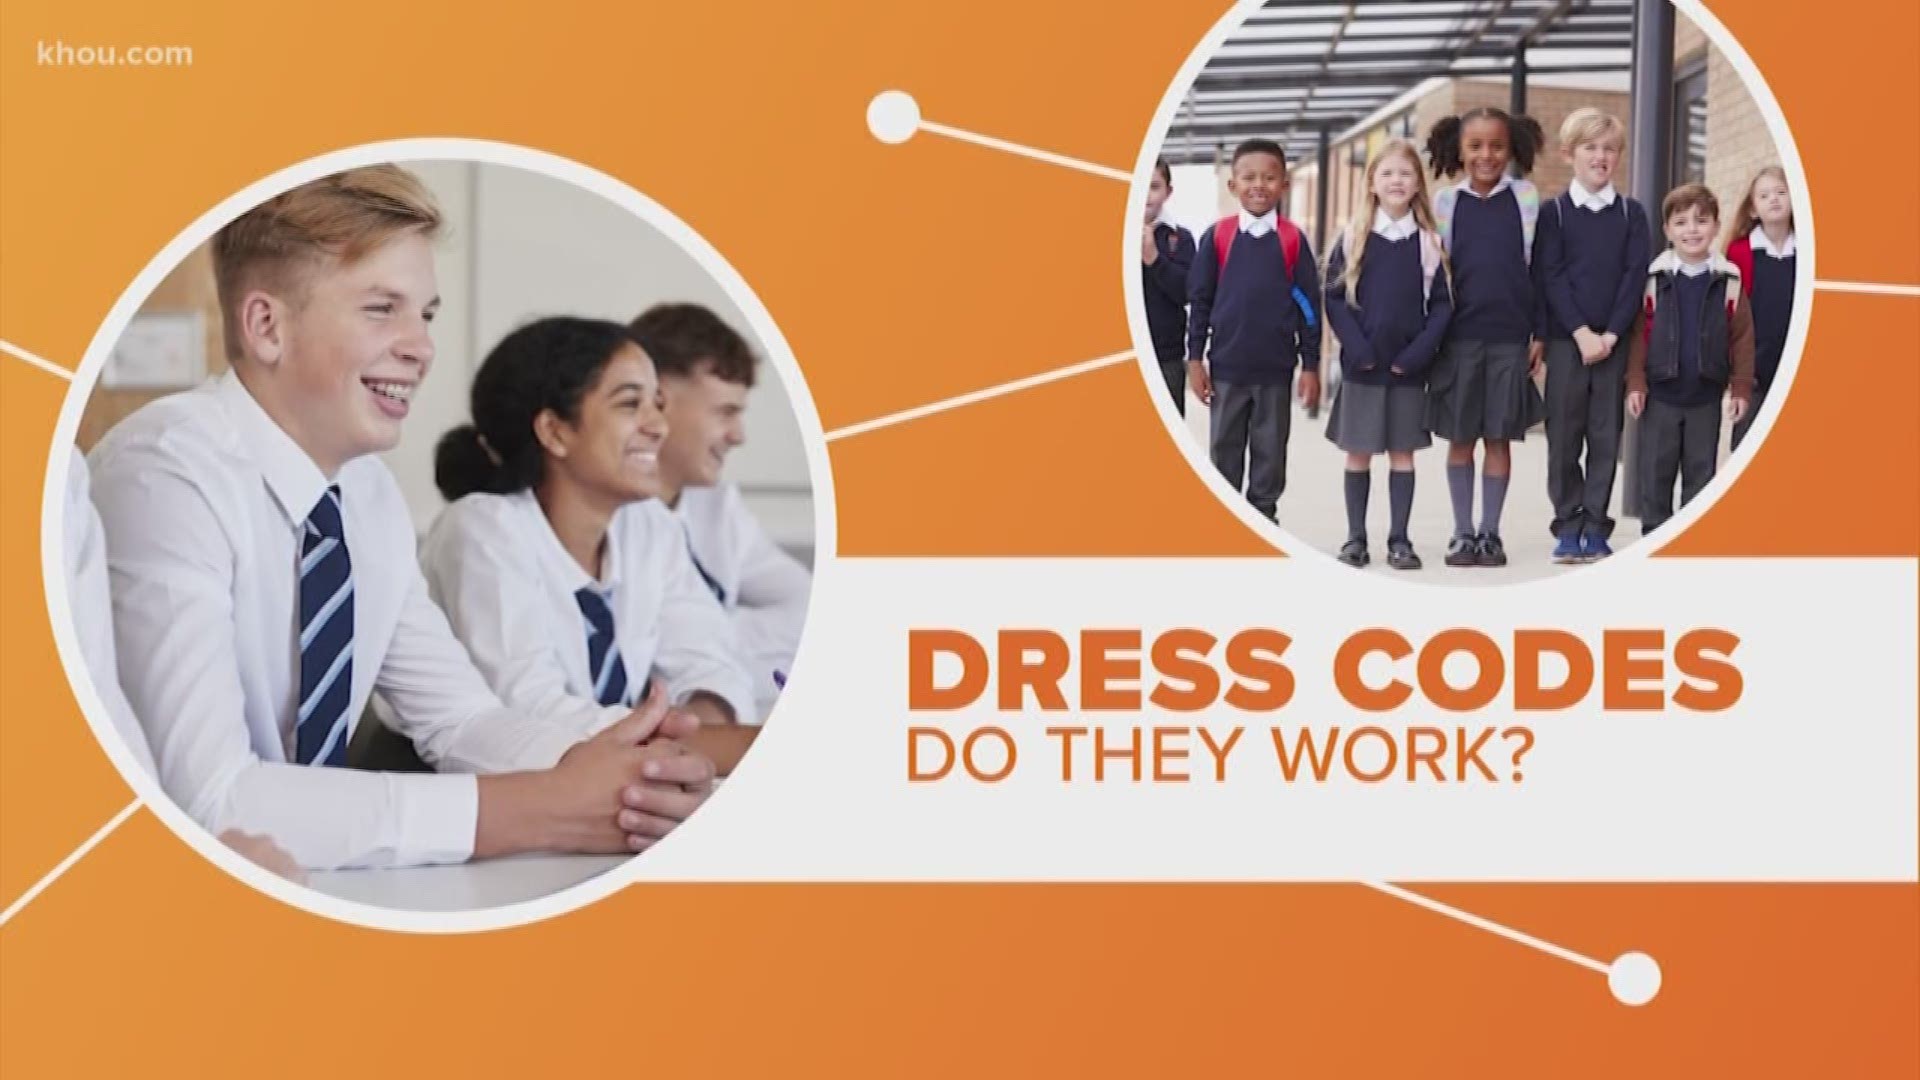 As the kids head back to school dress codes are on a lot of families' minds. 
How do those rules impact your child's classroom experience? Janelle Bludau connects the dots.